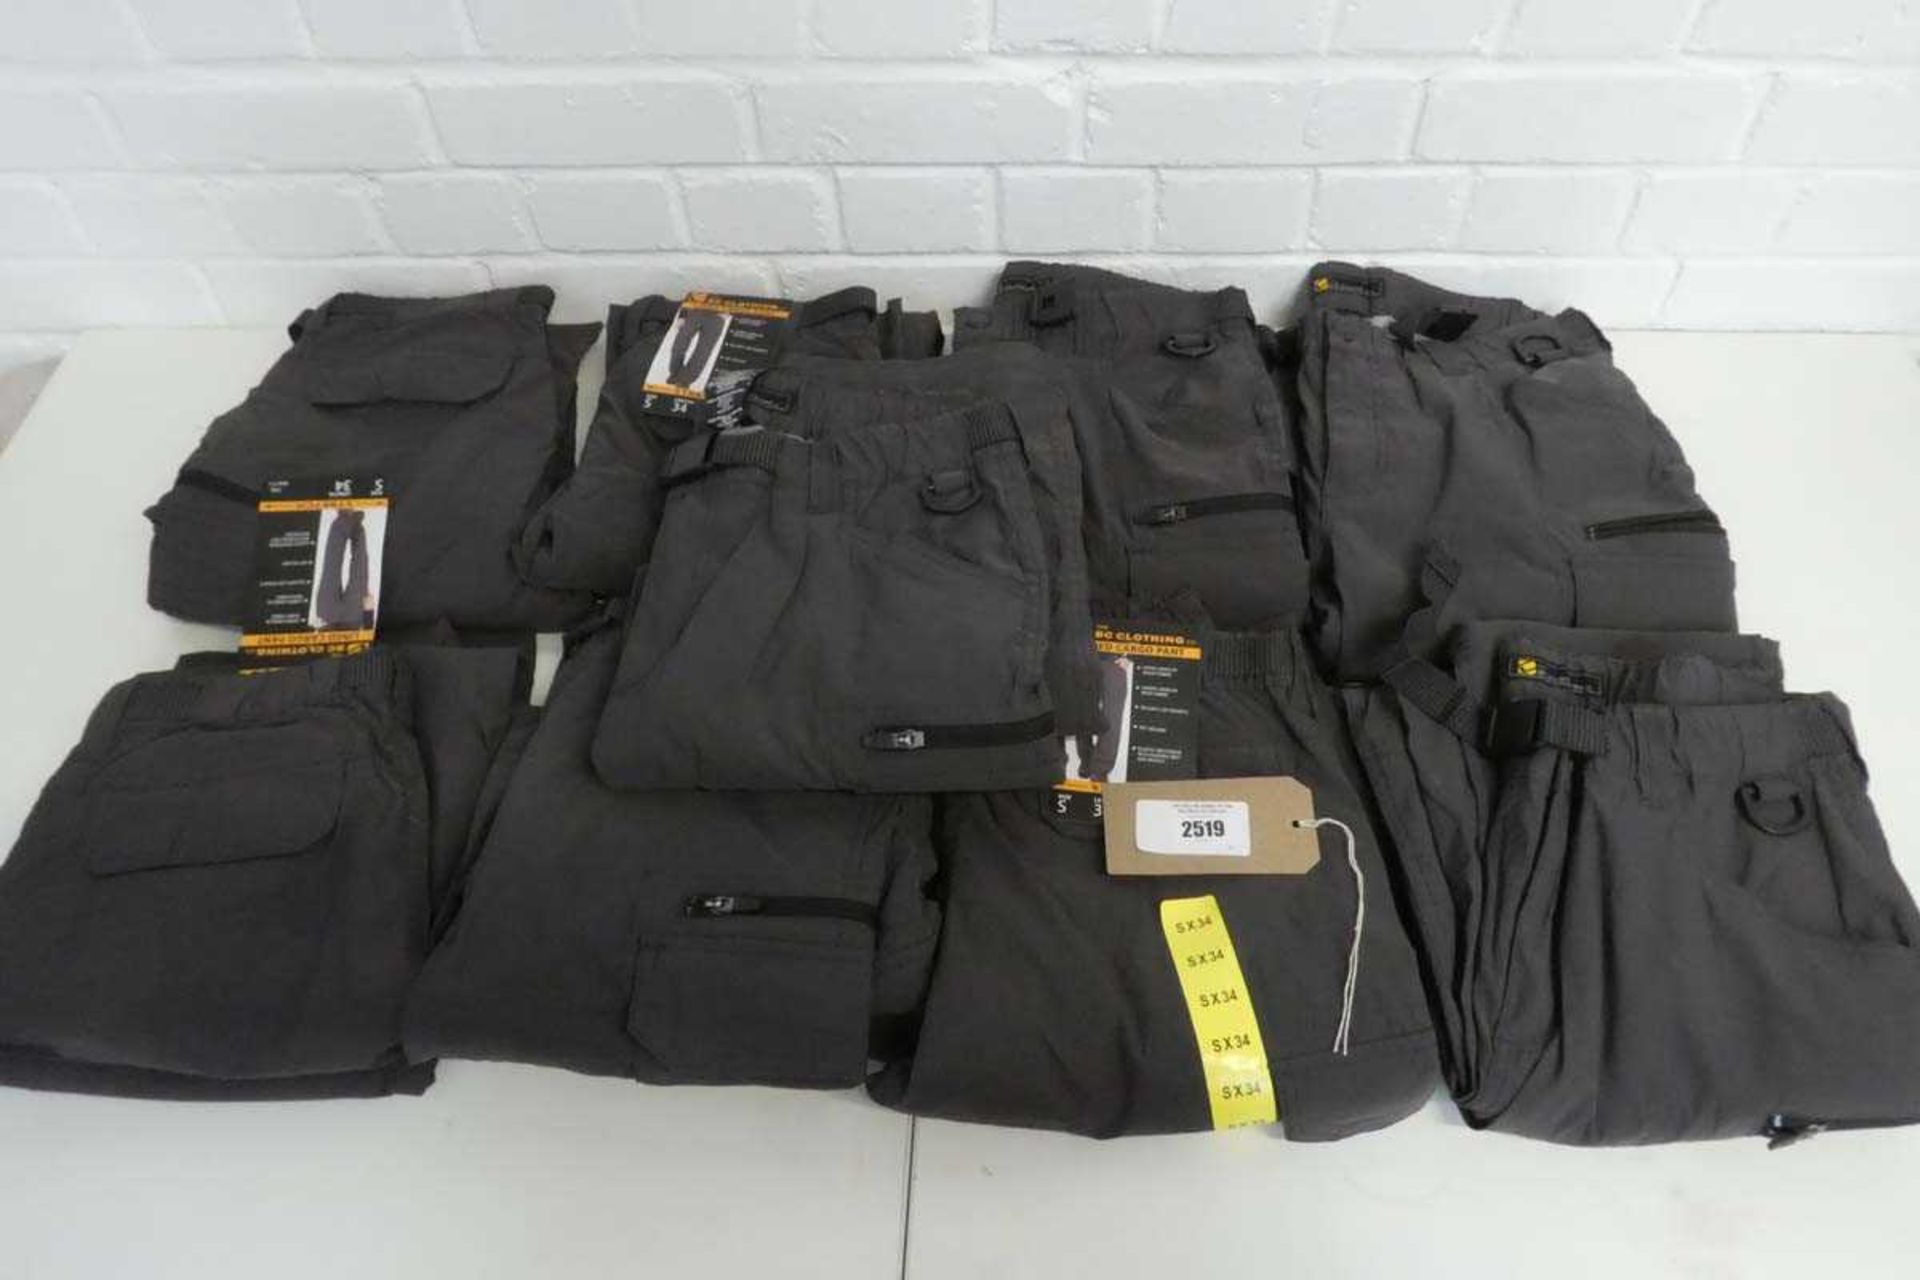 +VAT 9 pairs of BC Clothing lined cargo pants in grey